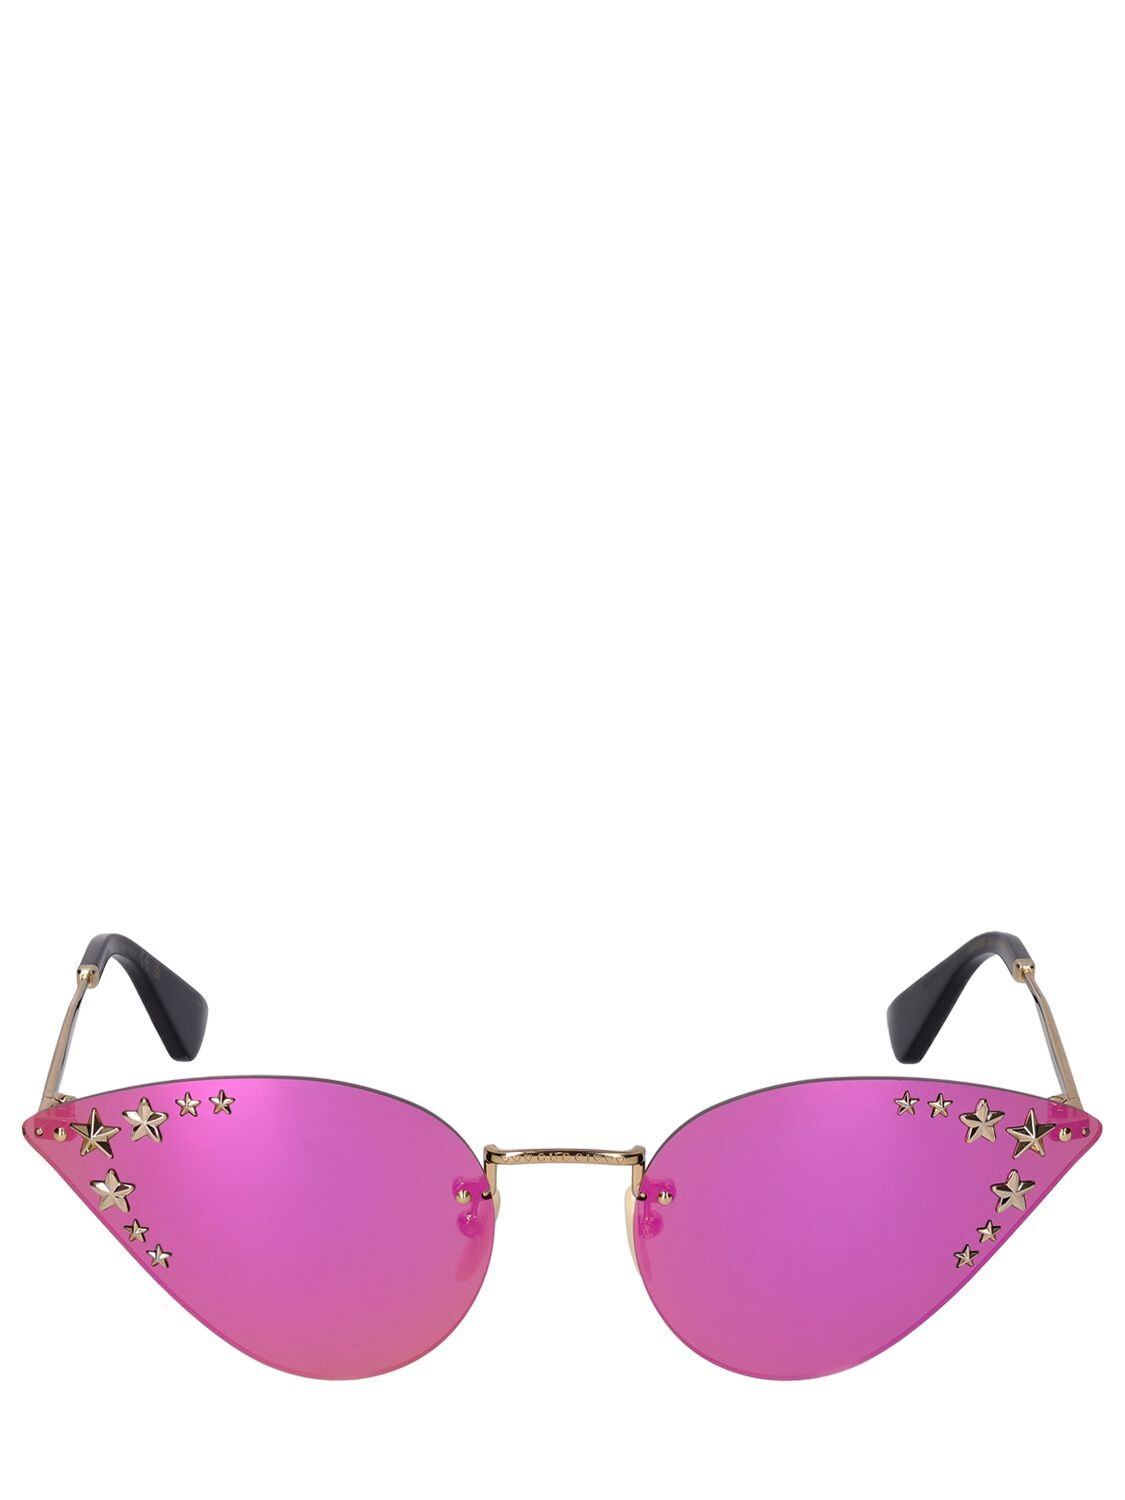 GUCCI Cate-eye Metal Sunglasses W/ Crystals in gold / pink